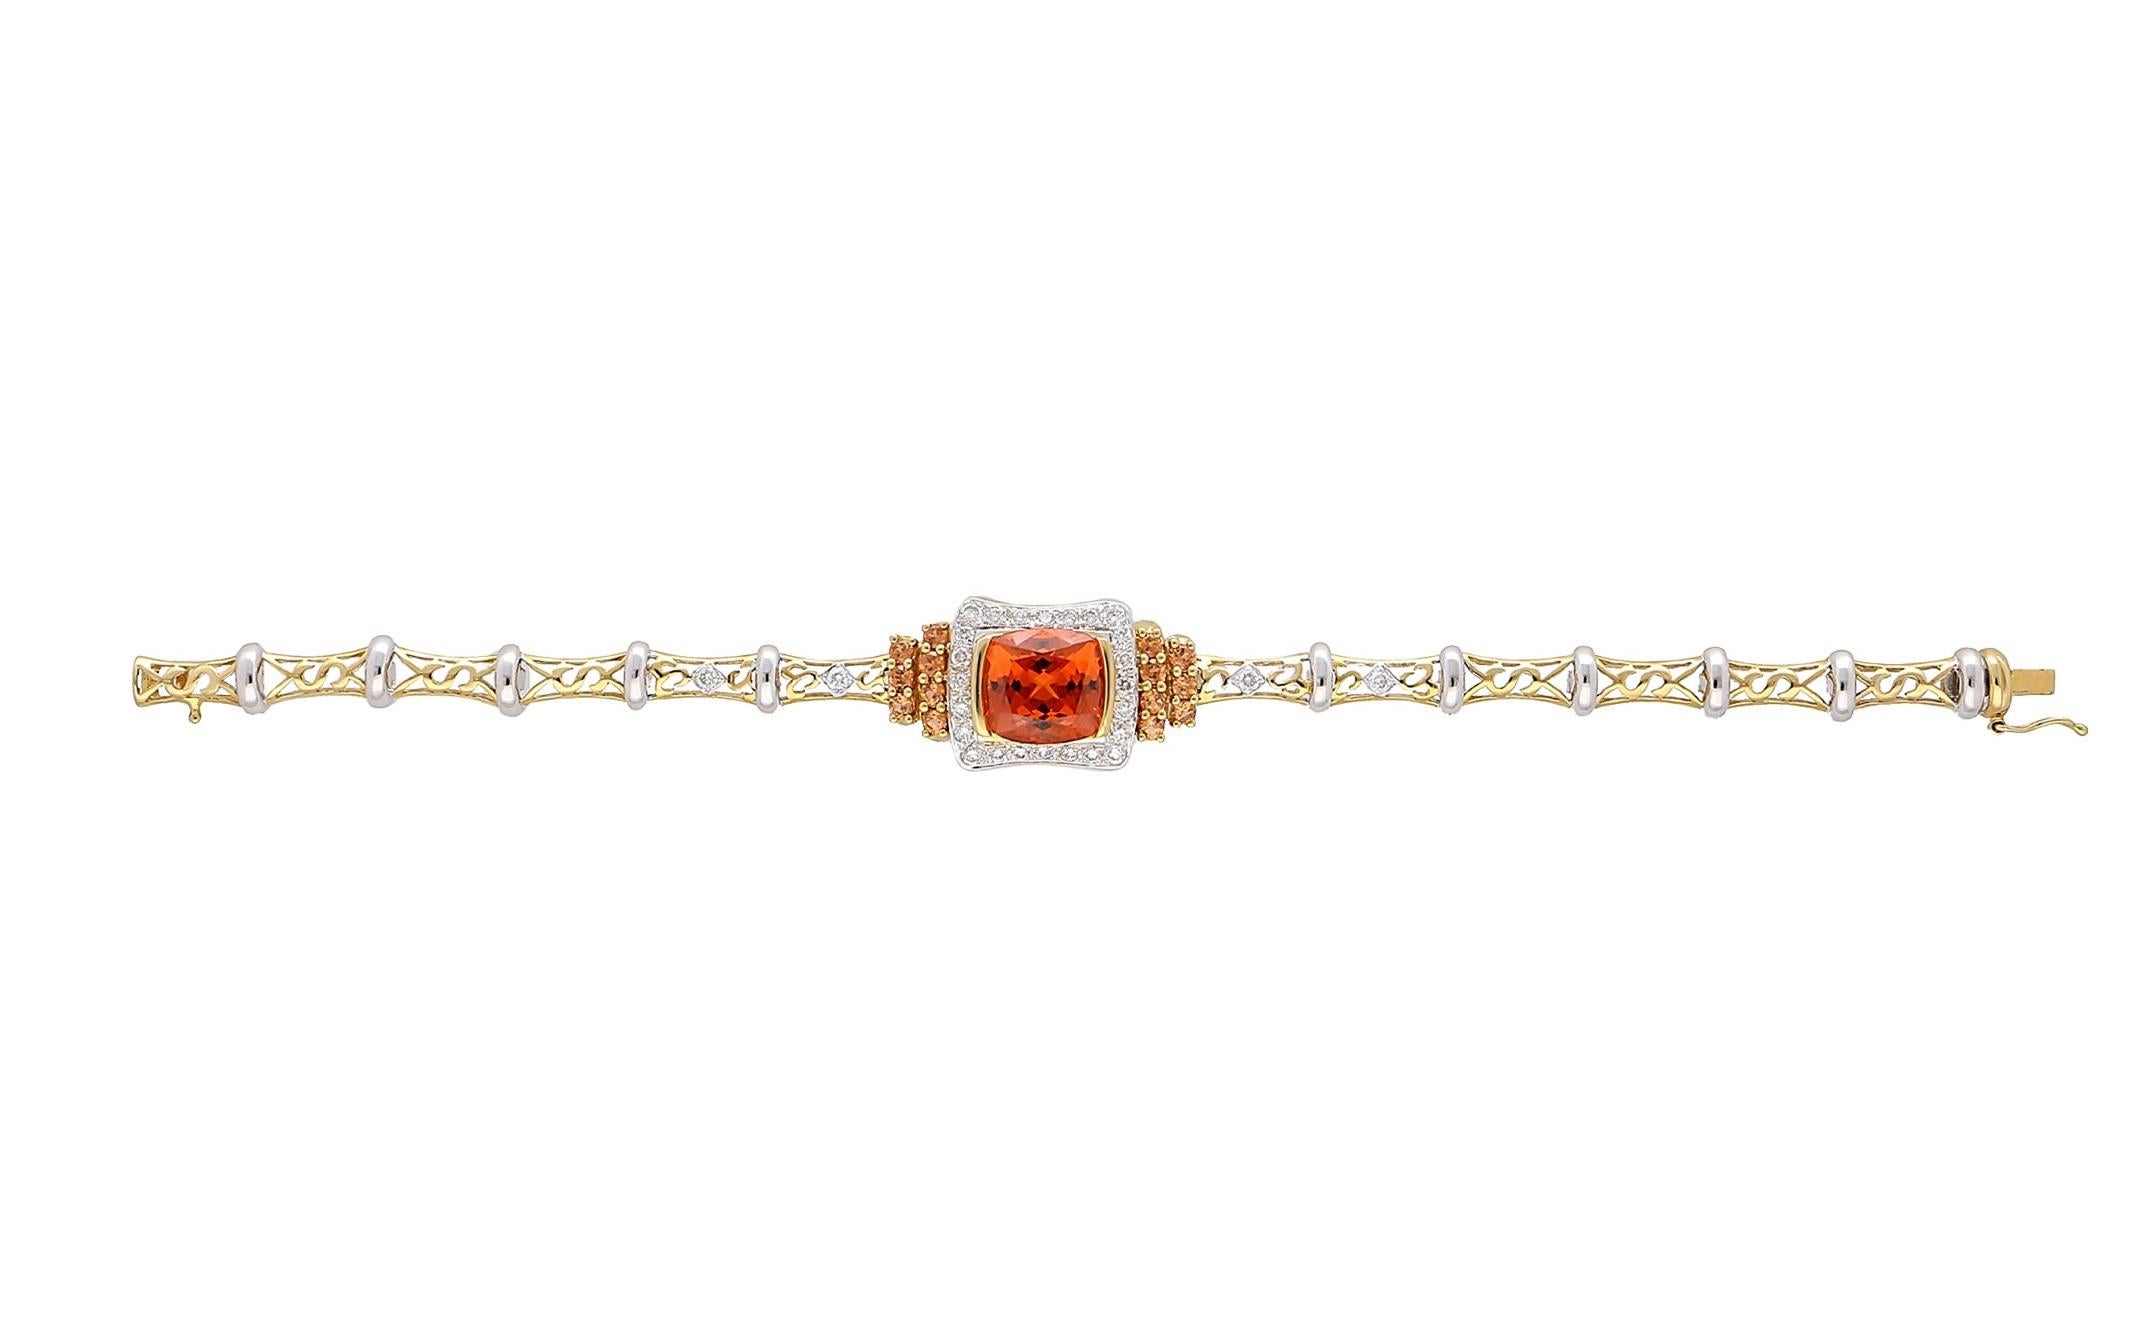 9.50 Carat GIA Certified Spessartine Garnet and Diamond Bracelet, a marvel in 18 karat two-tone gold. Adorned with a meticulously carved floral pattern, it boasts a captivating cushion-cut Spessartine Garnet, radiating a fiery, vivid orange hue that